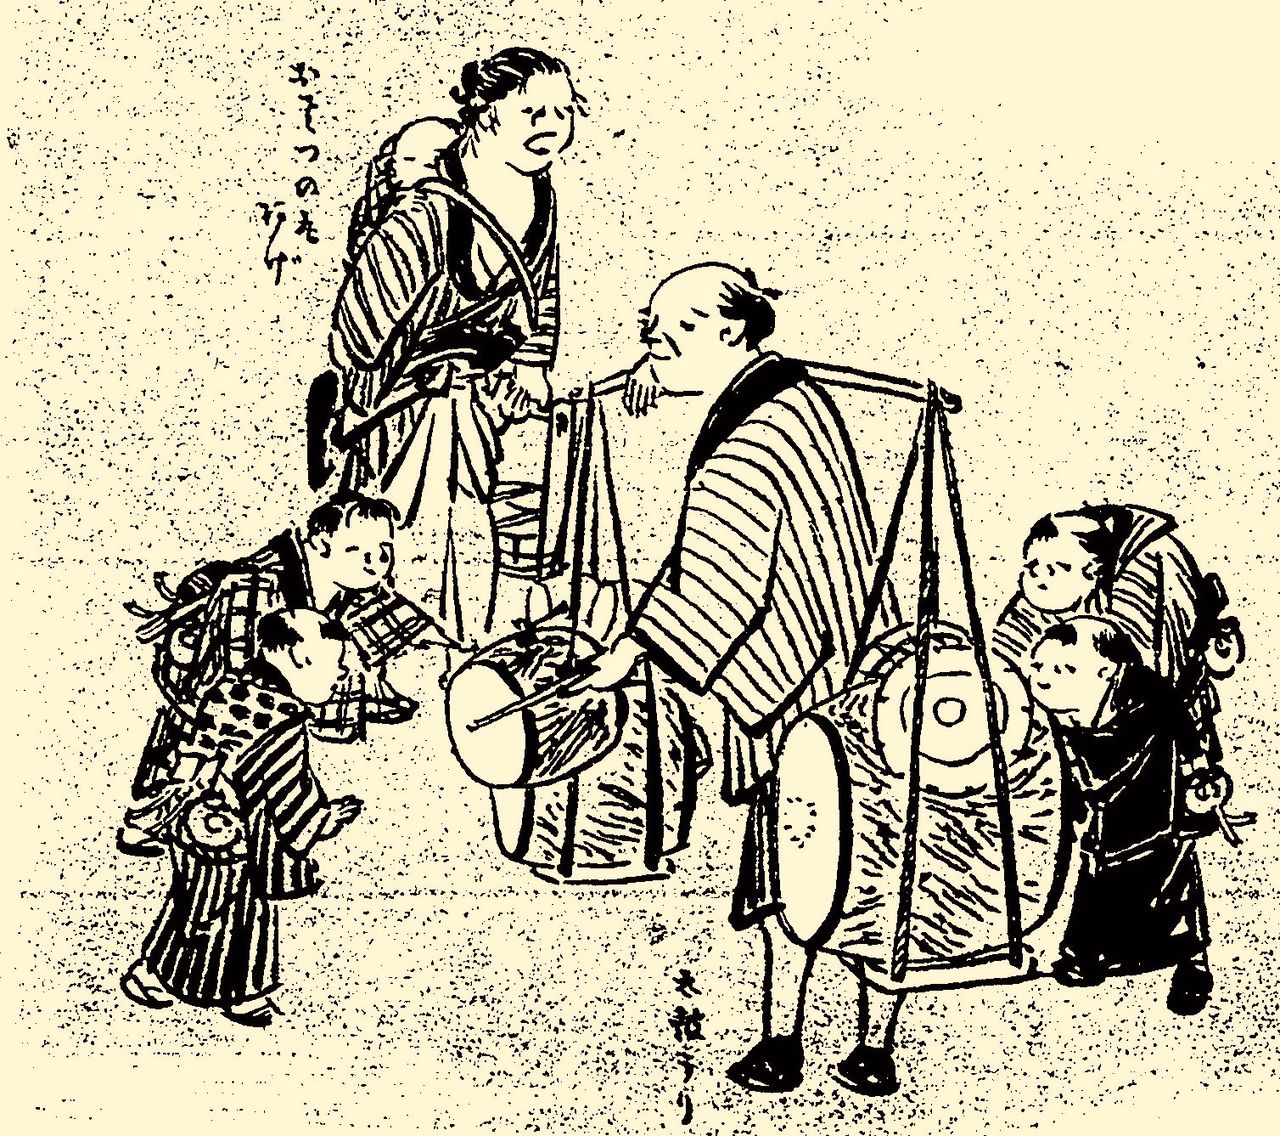 Hatsu-uma was an exciting event for children. Here curious youths eagerly watch a drum seller showing off his wares, as depicted in Kikuchi Kiichirō’s work Edofunai ehon fūzoku ōrai (Picture Book of Edo Customs and Manners). (Courtesy National Diet Library)